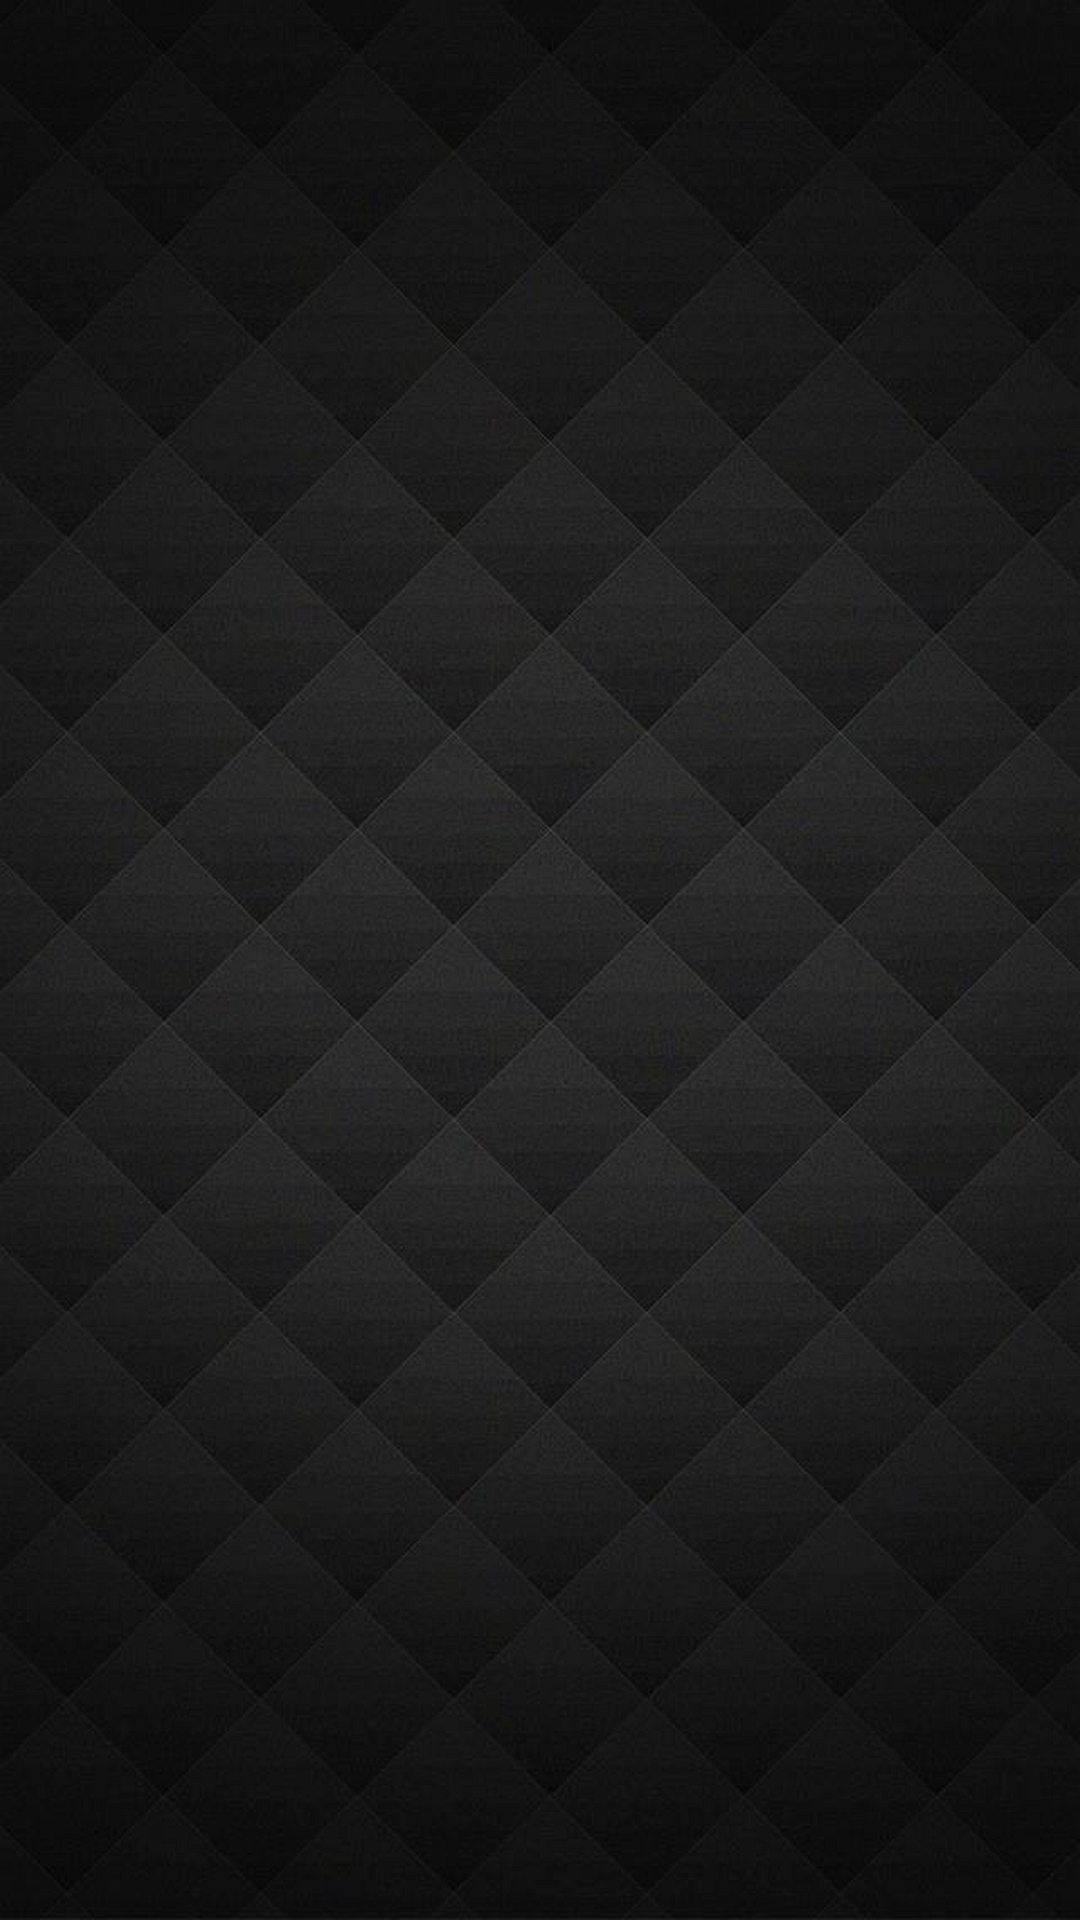 Black Wallpapers For Smartphone 87